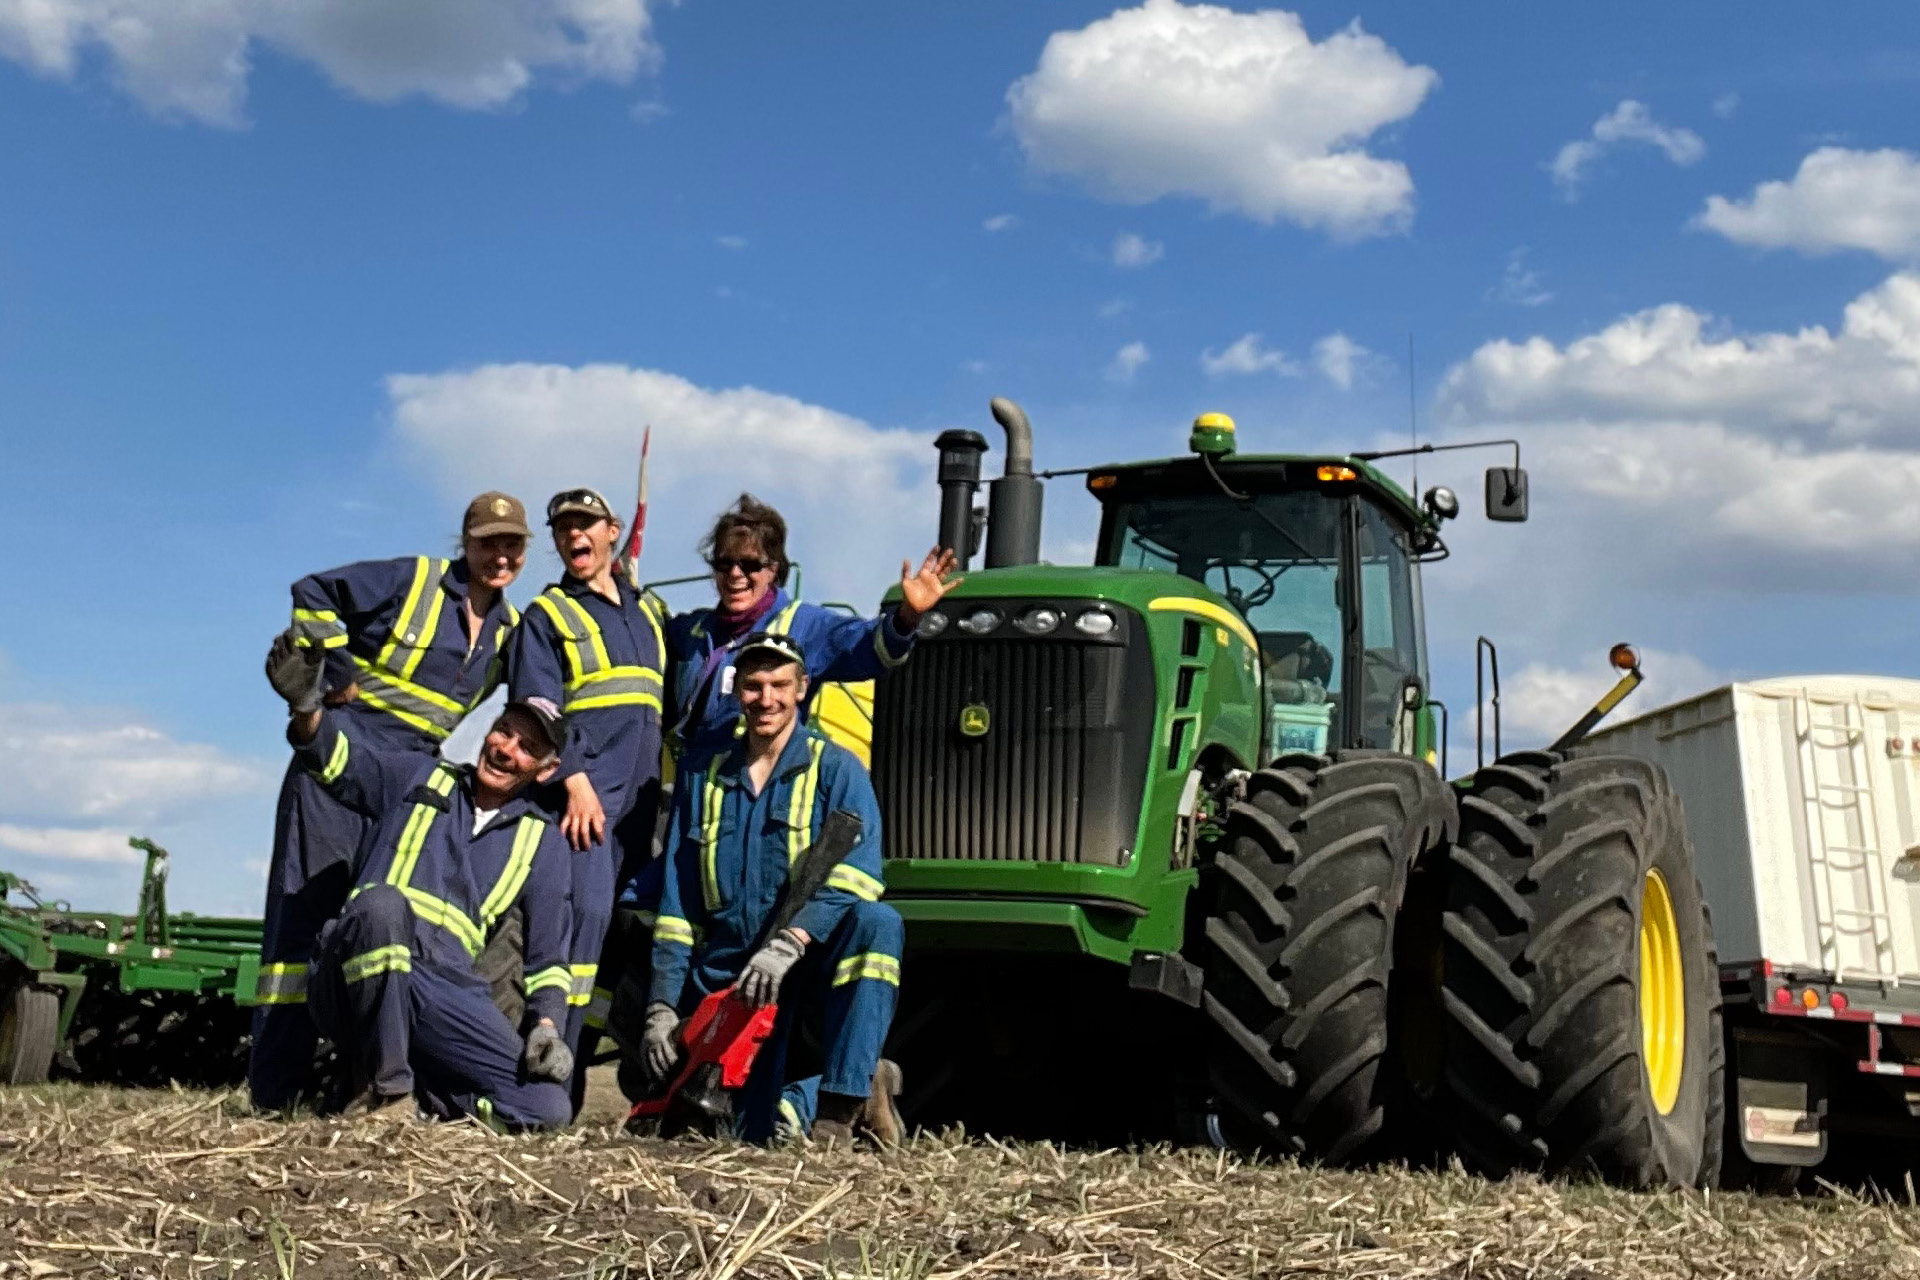 Alyson and family pose in front of a tractor on their family farm.